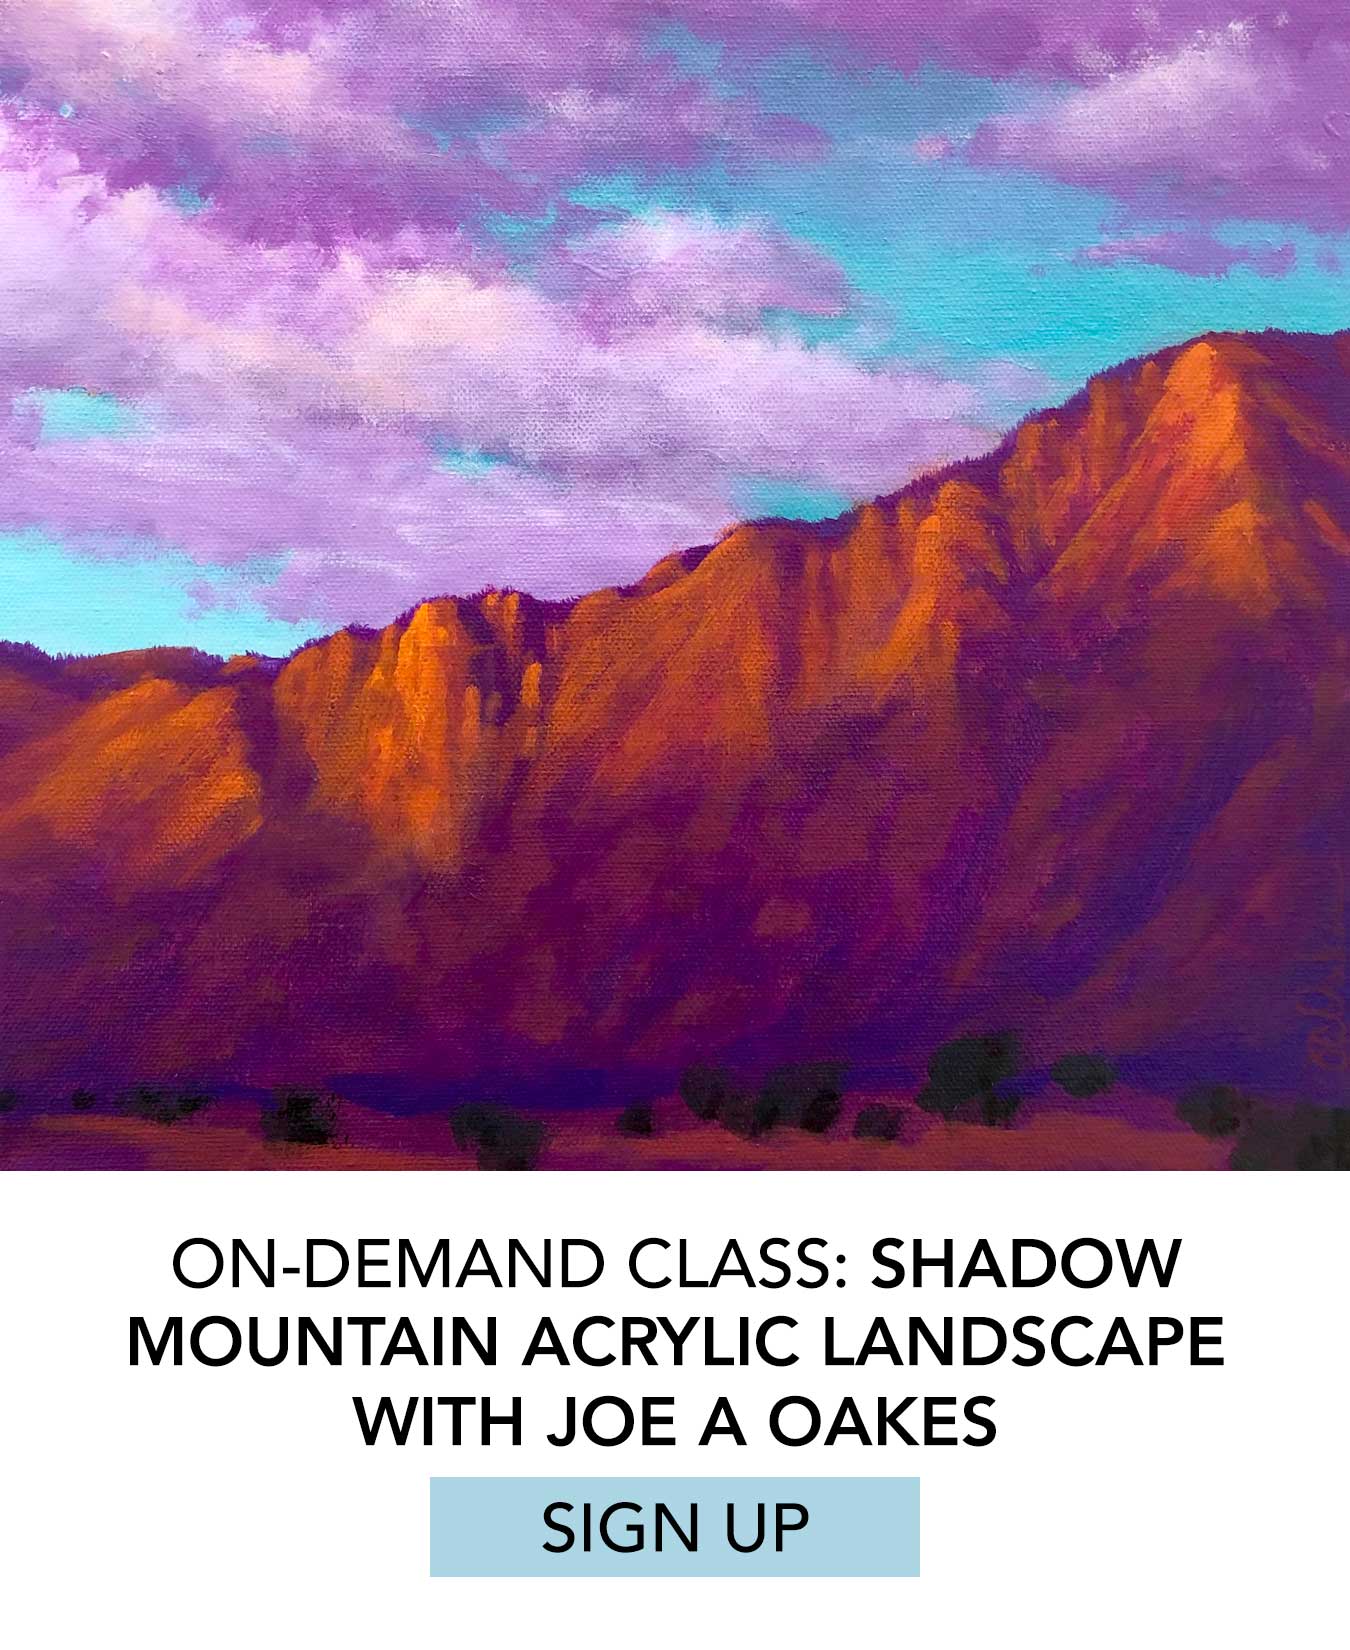 On-Demand Class: Shadow Mountain Acrylic Landscape with Joe A Oakes. Click to Sign Up.